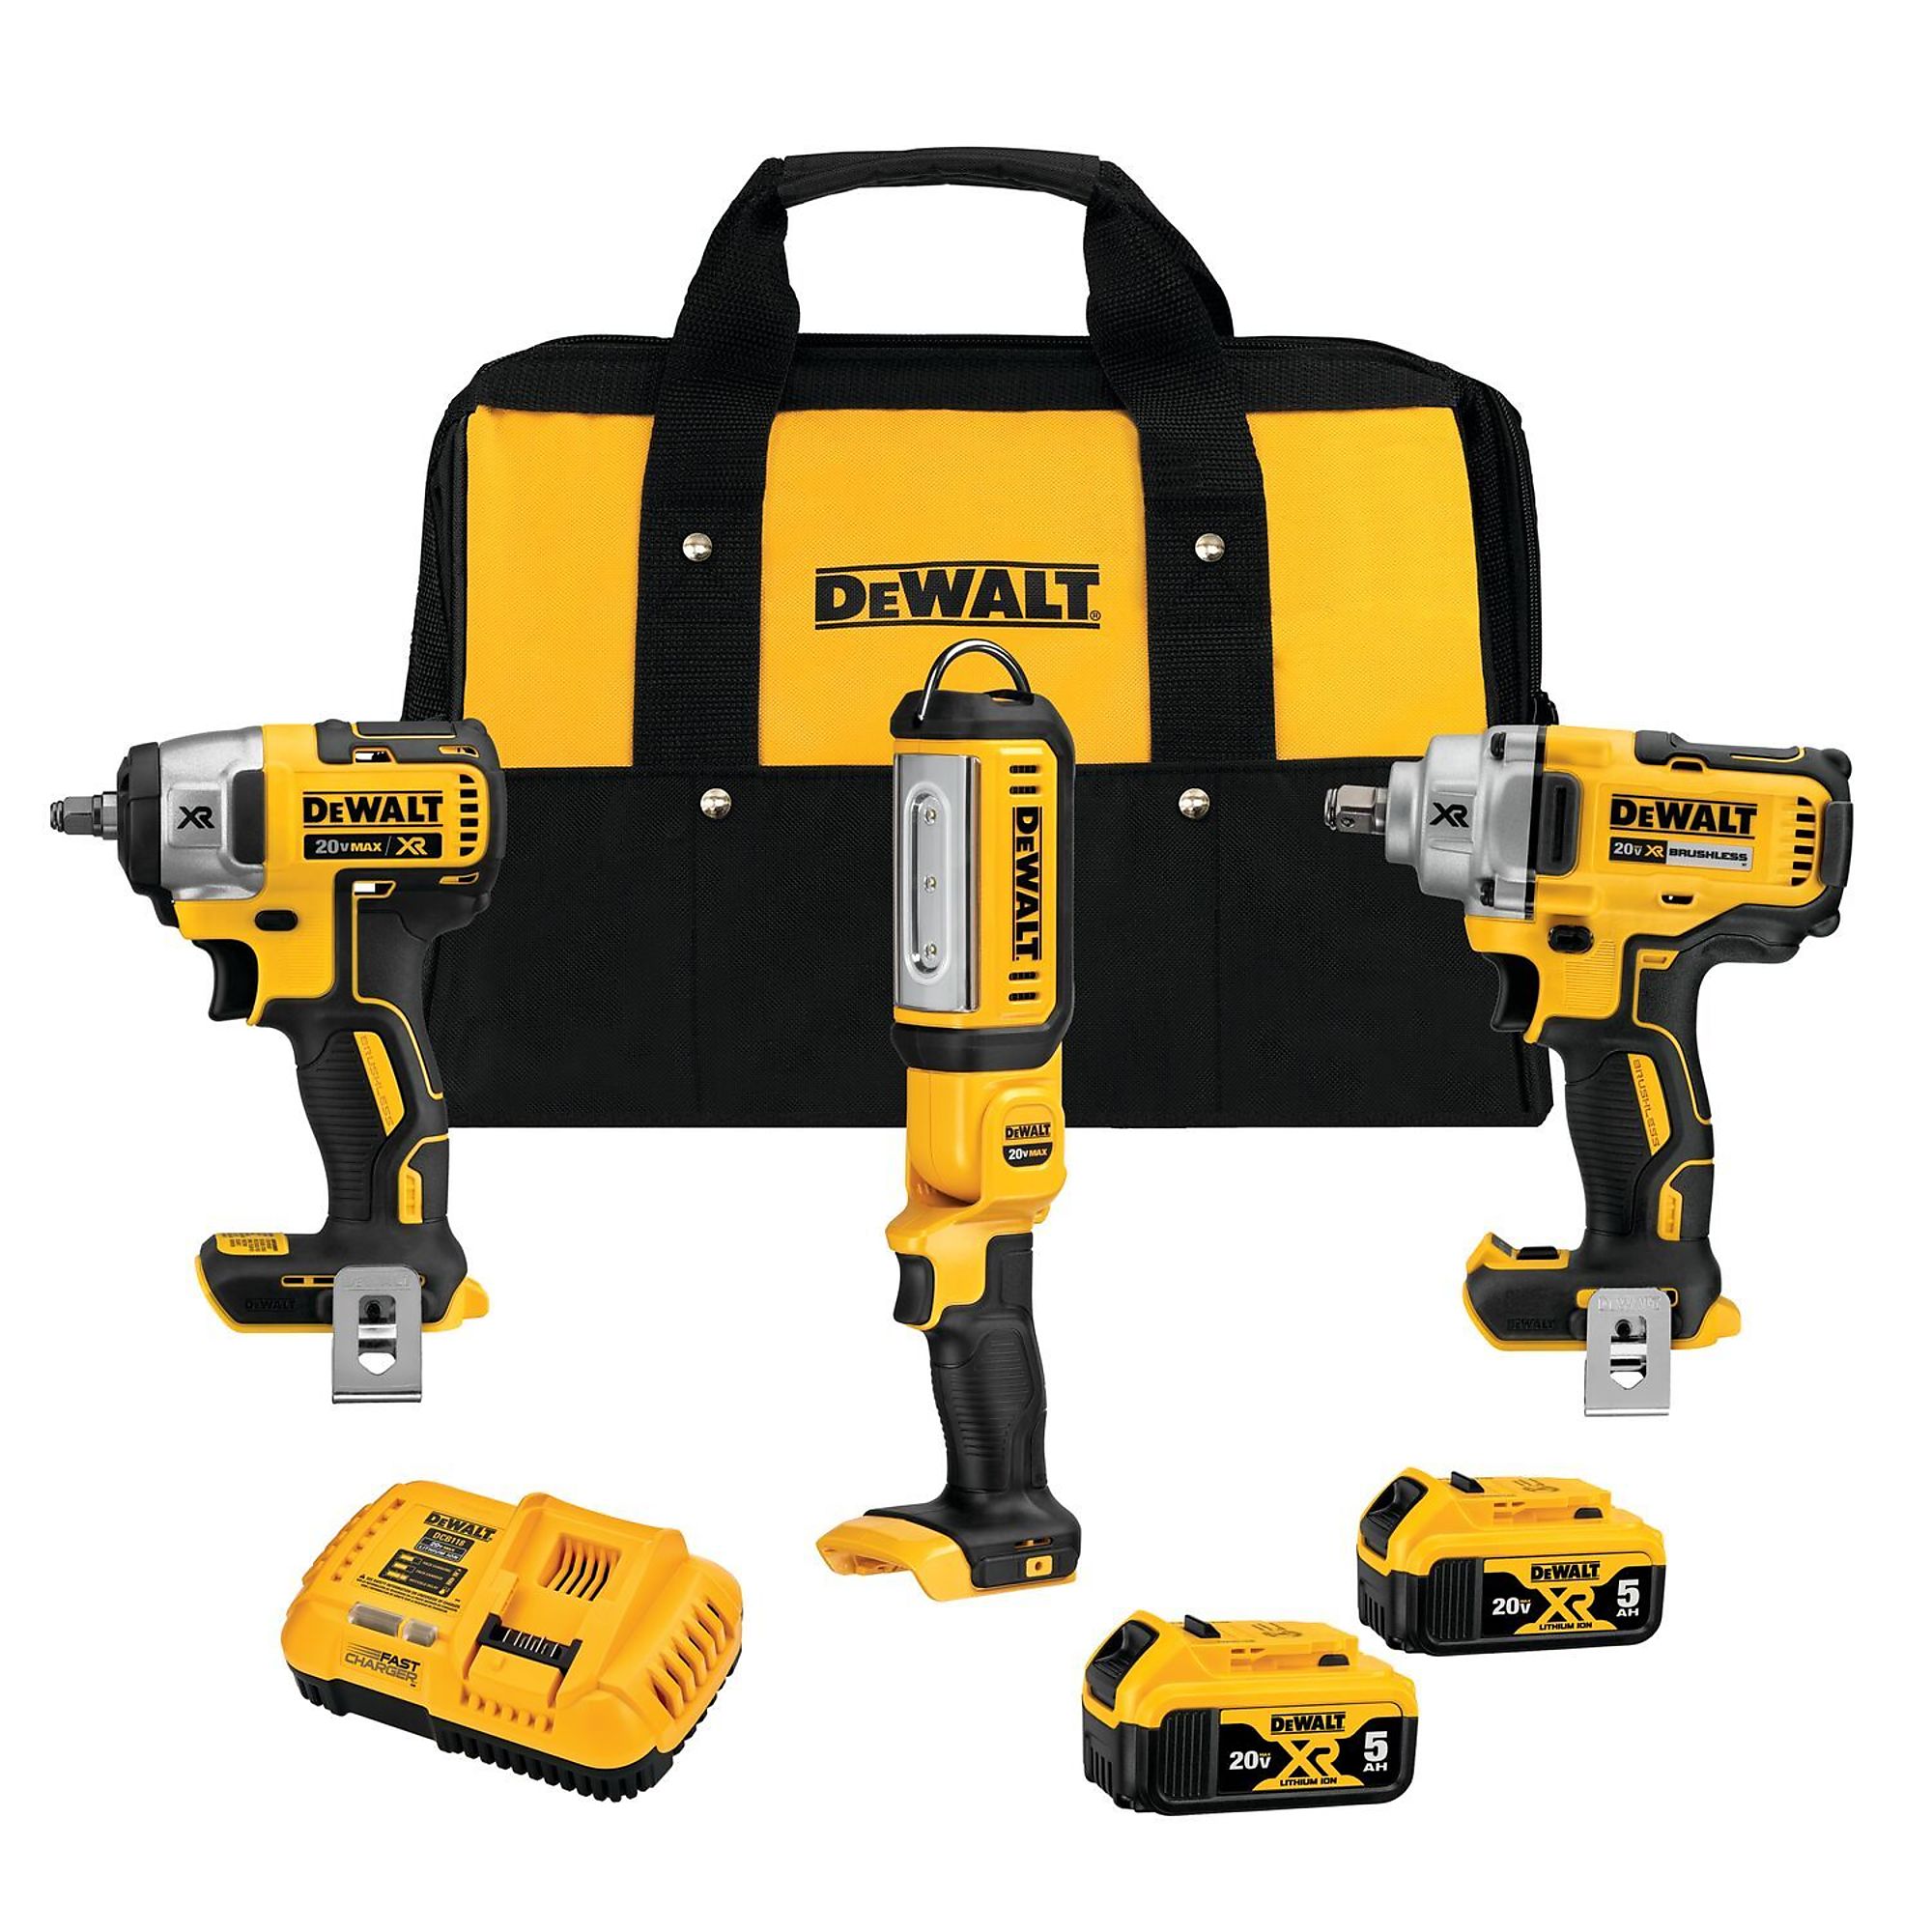 DEWALT, 20V MAX* XR Brushless Cordless 3-Tool Automotive, Chuck Size 1/2 in, Tools Included (qty.) 3 Model DCK302P2